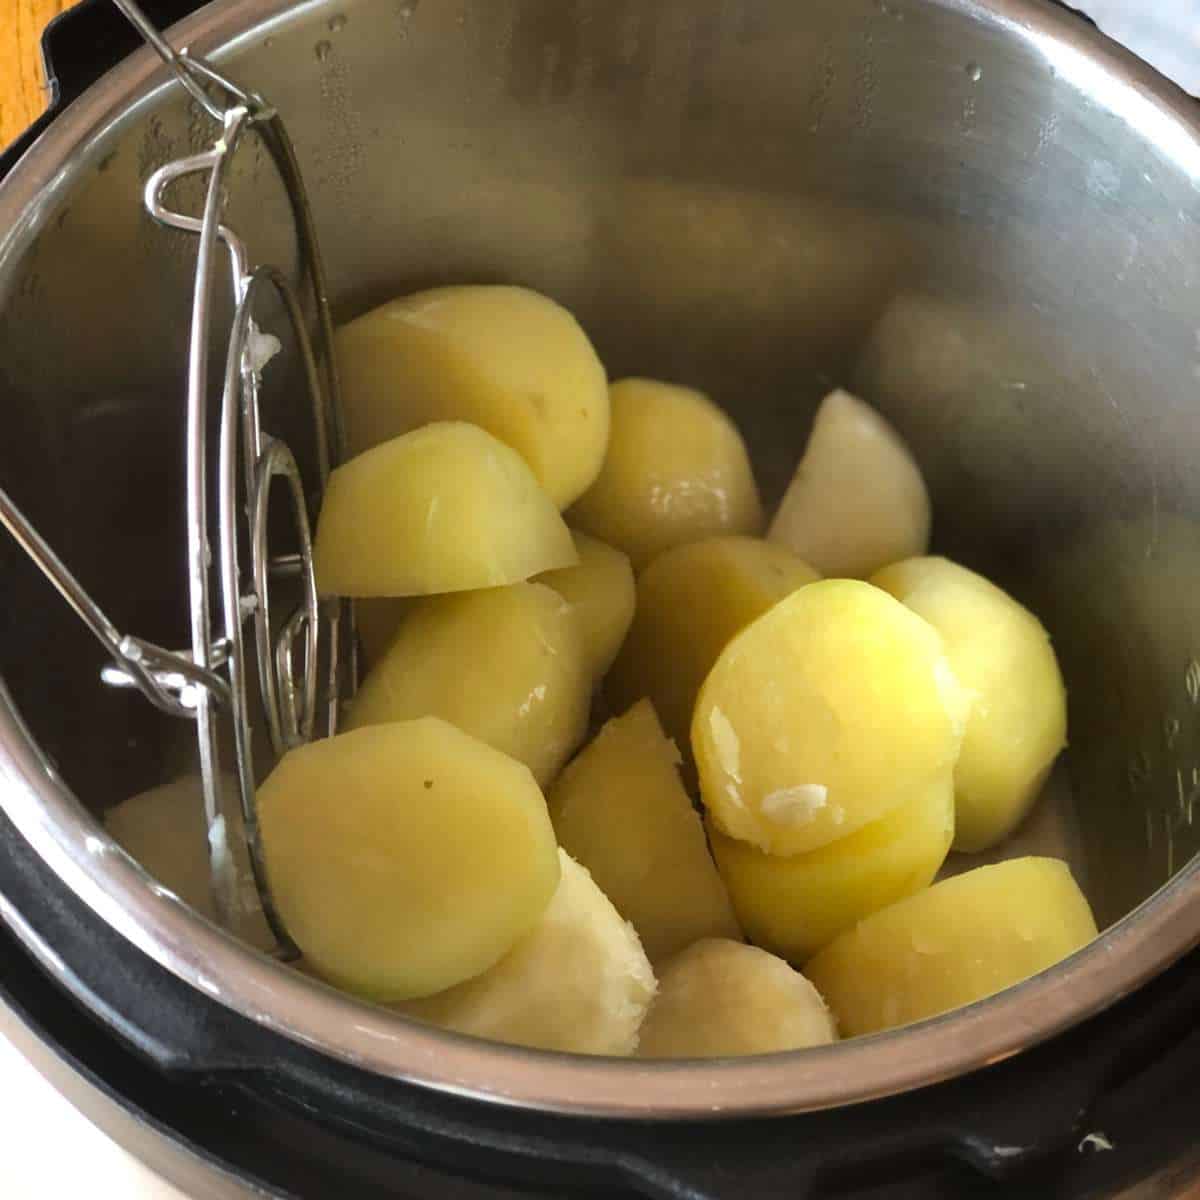 Cooked potatoes in a pressure cooker pot with the trivet being removed.